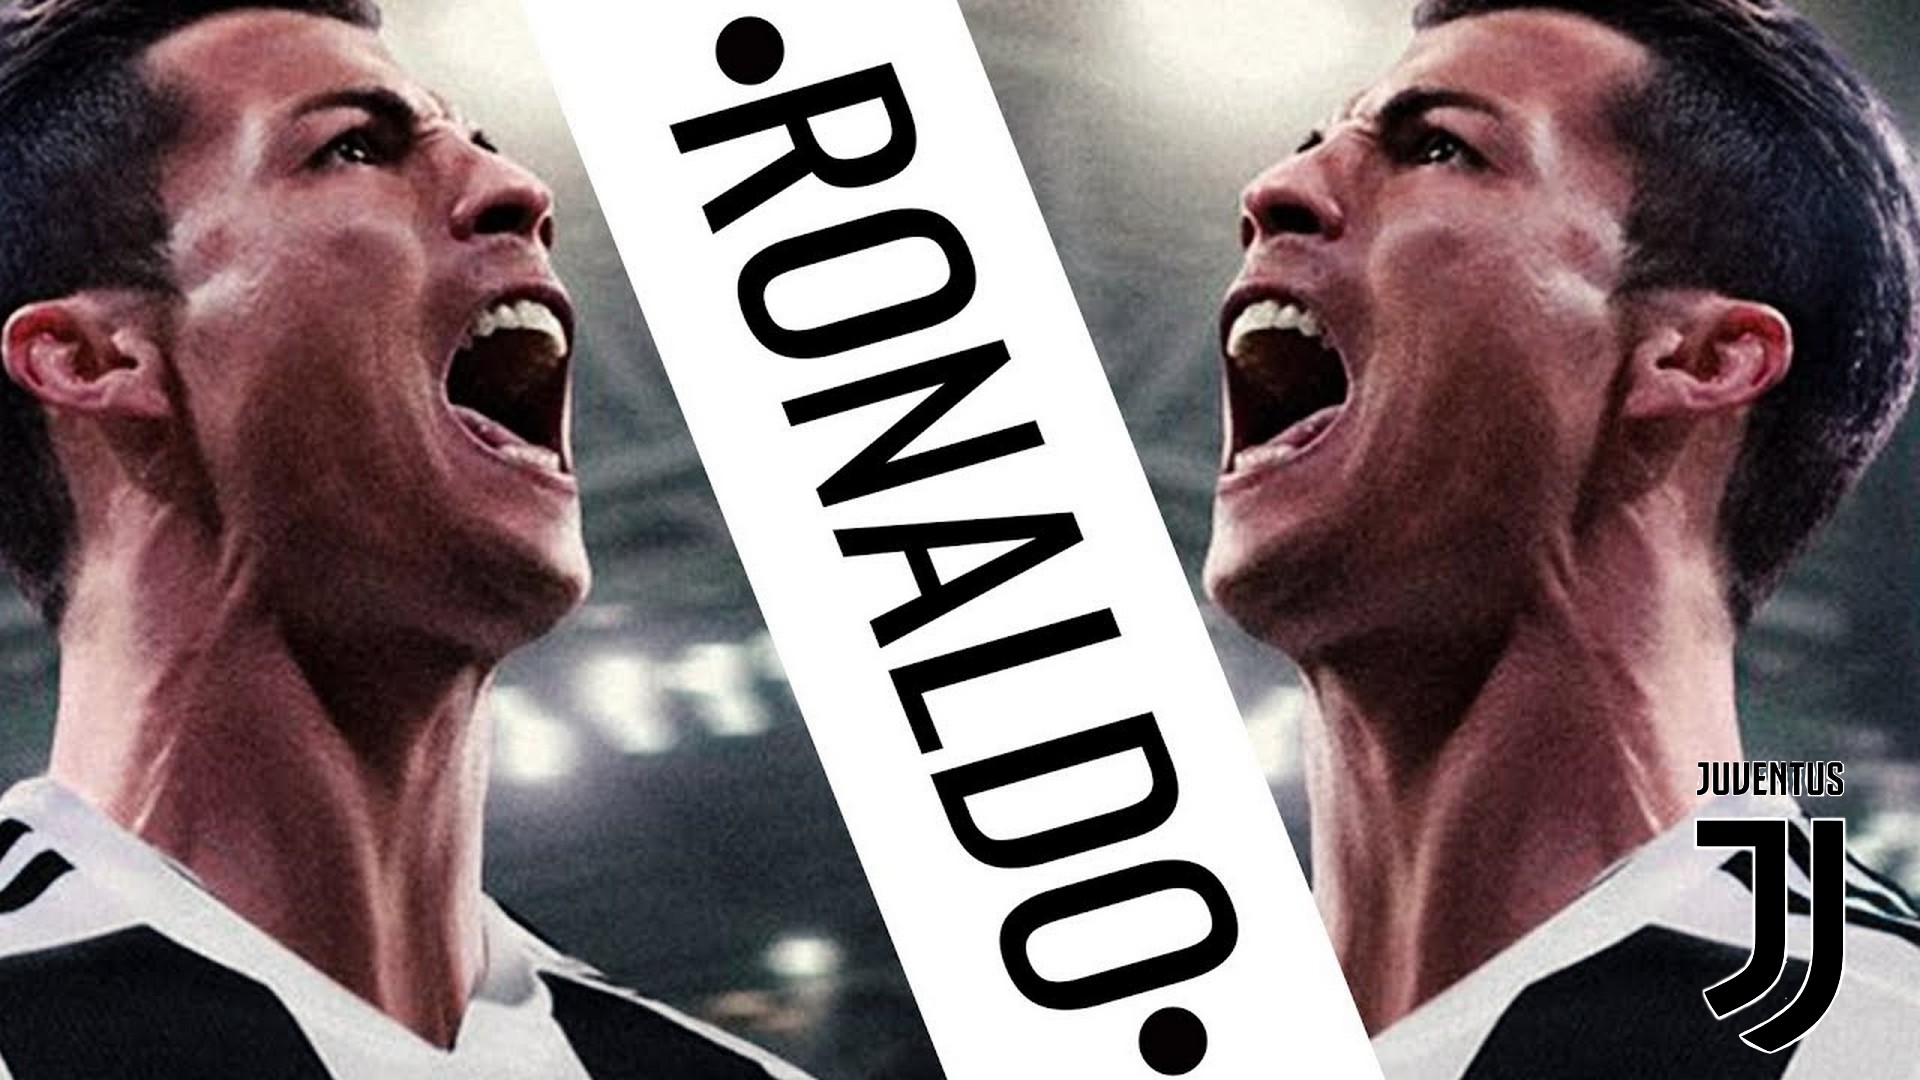 Wallpapers HD Cristiano Ronaldo Juve with resolution 1920x1080 pixel. You can make this wallpaper for your Mac or Windows Desktop Background, iPhone, Android or Tablet and another Smartphone device